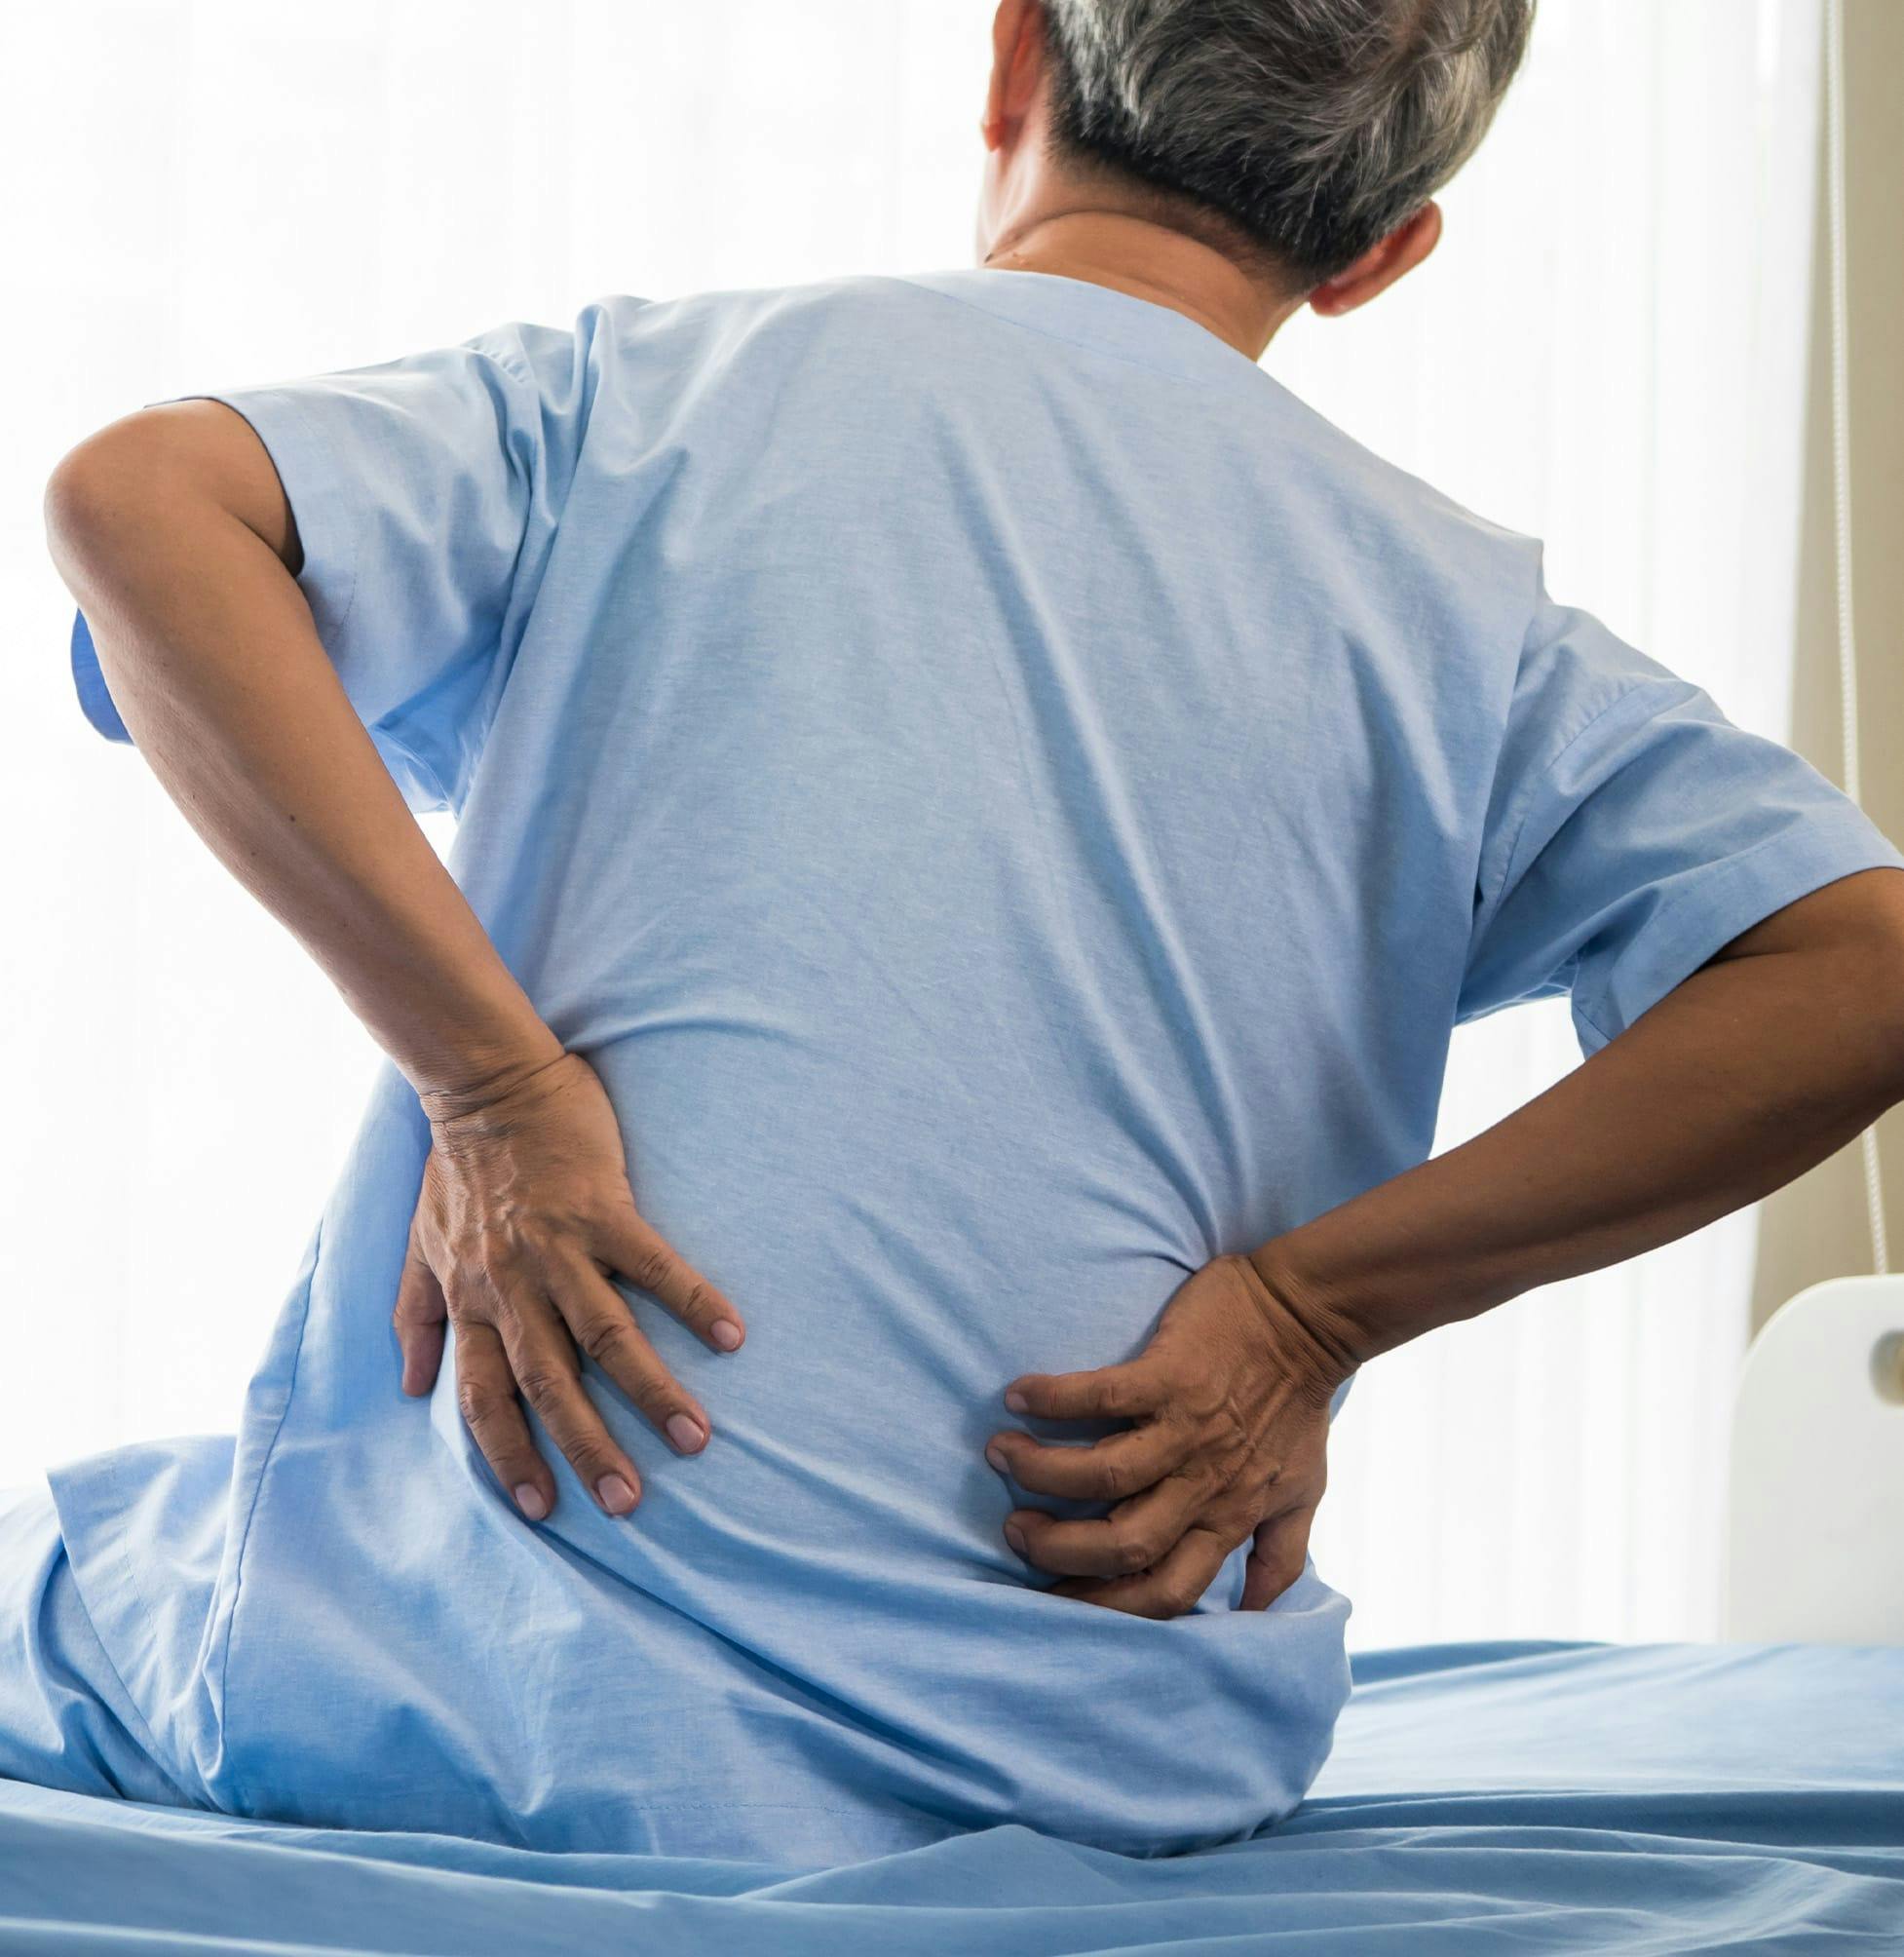 there is a man with a back pain sitting on a bed